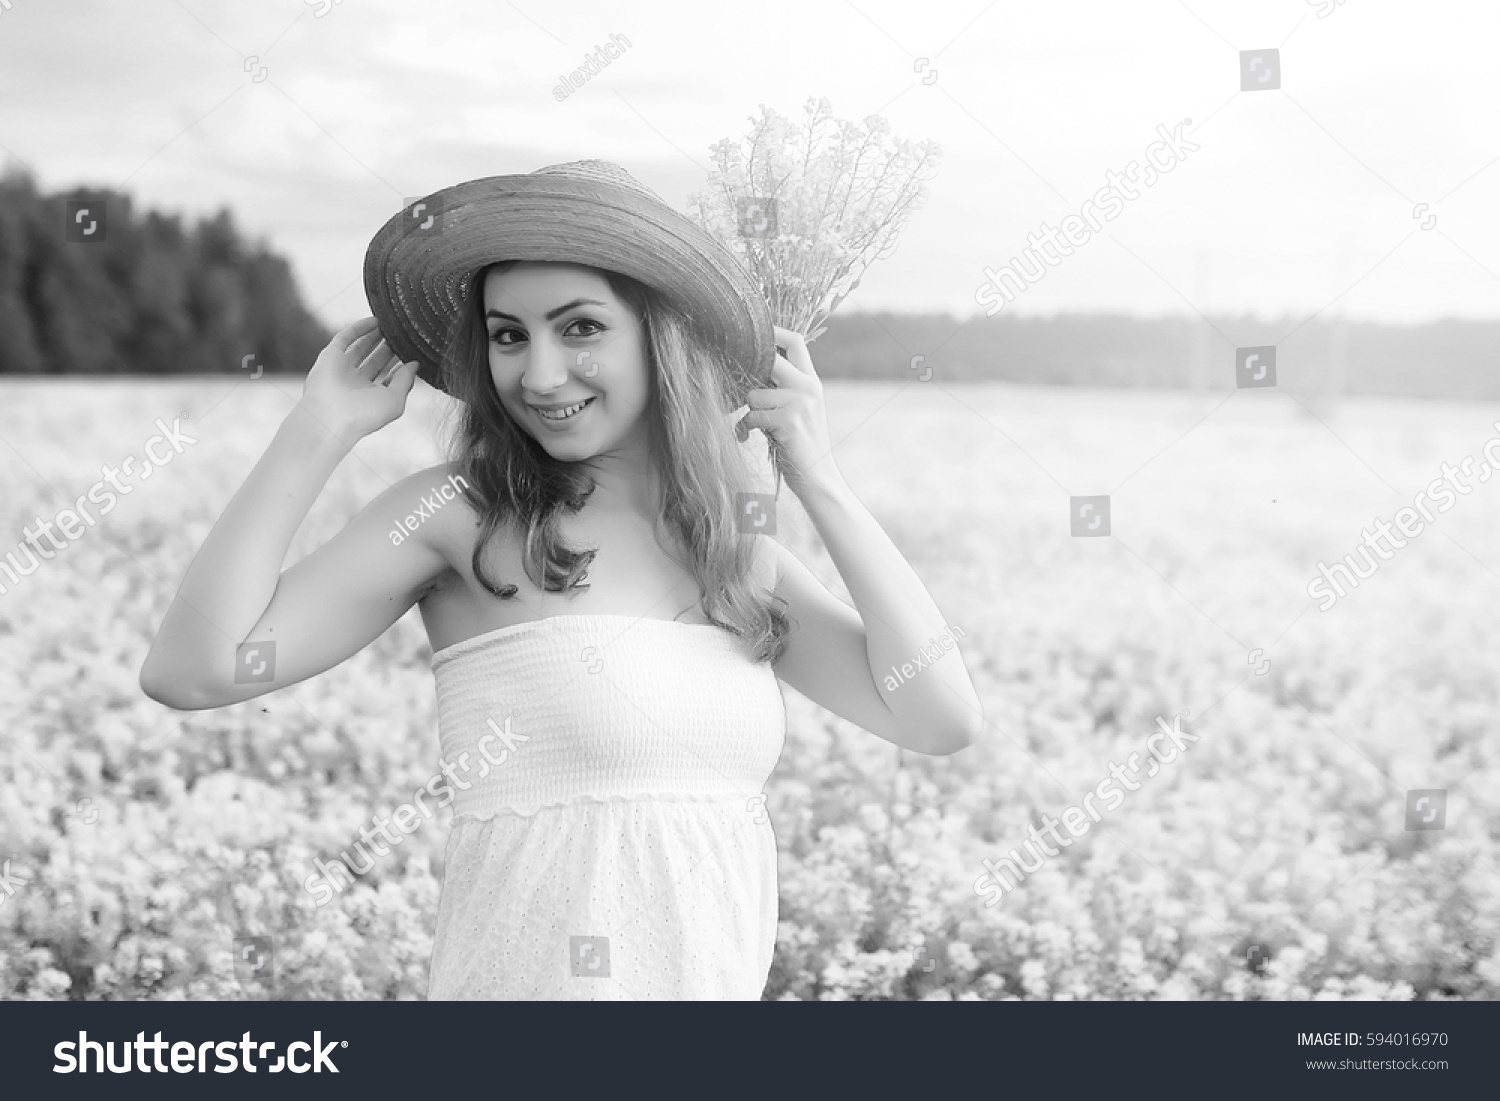 monochrome portrait of young girl in a hat standing in huge field of flowers
 #594016970